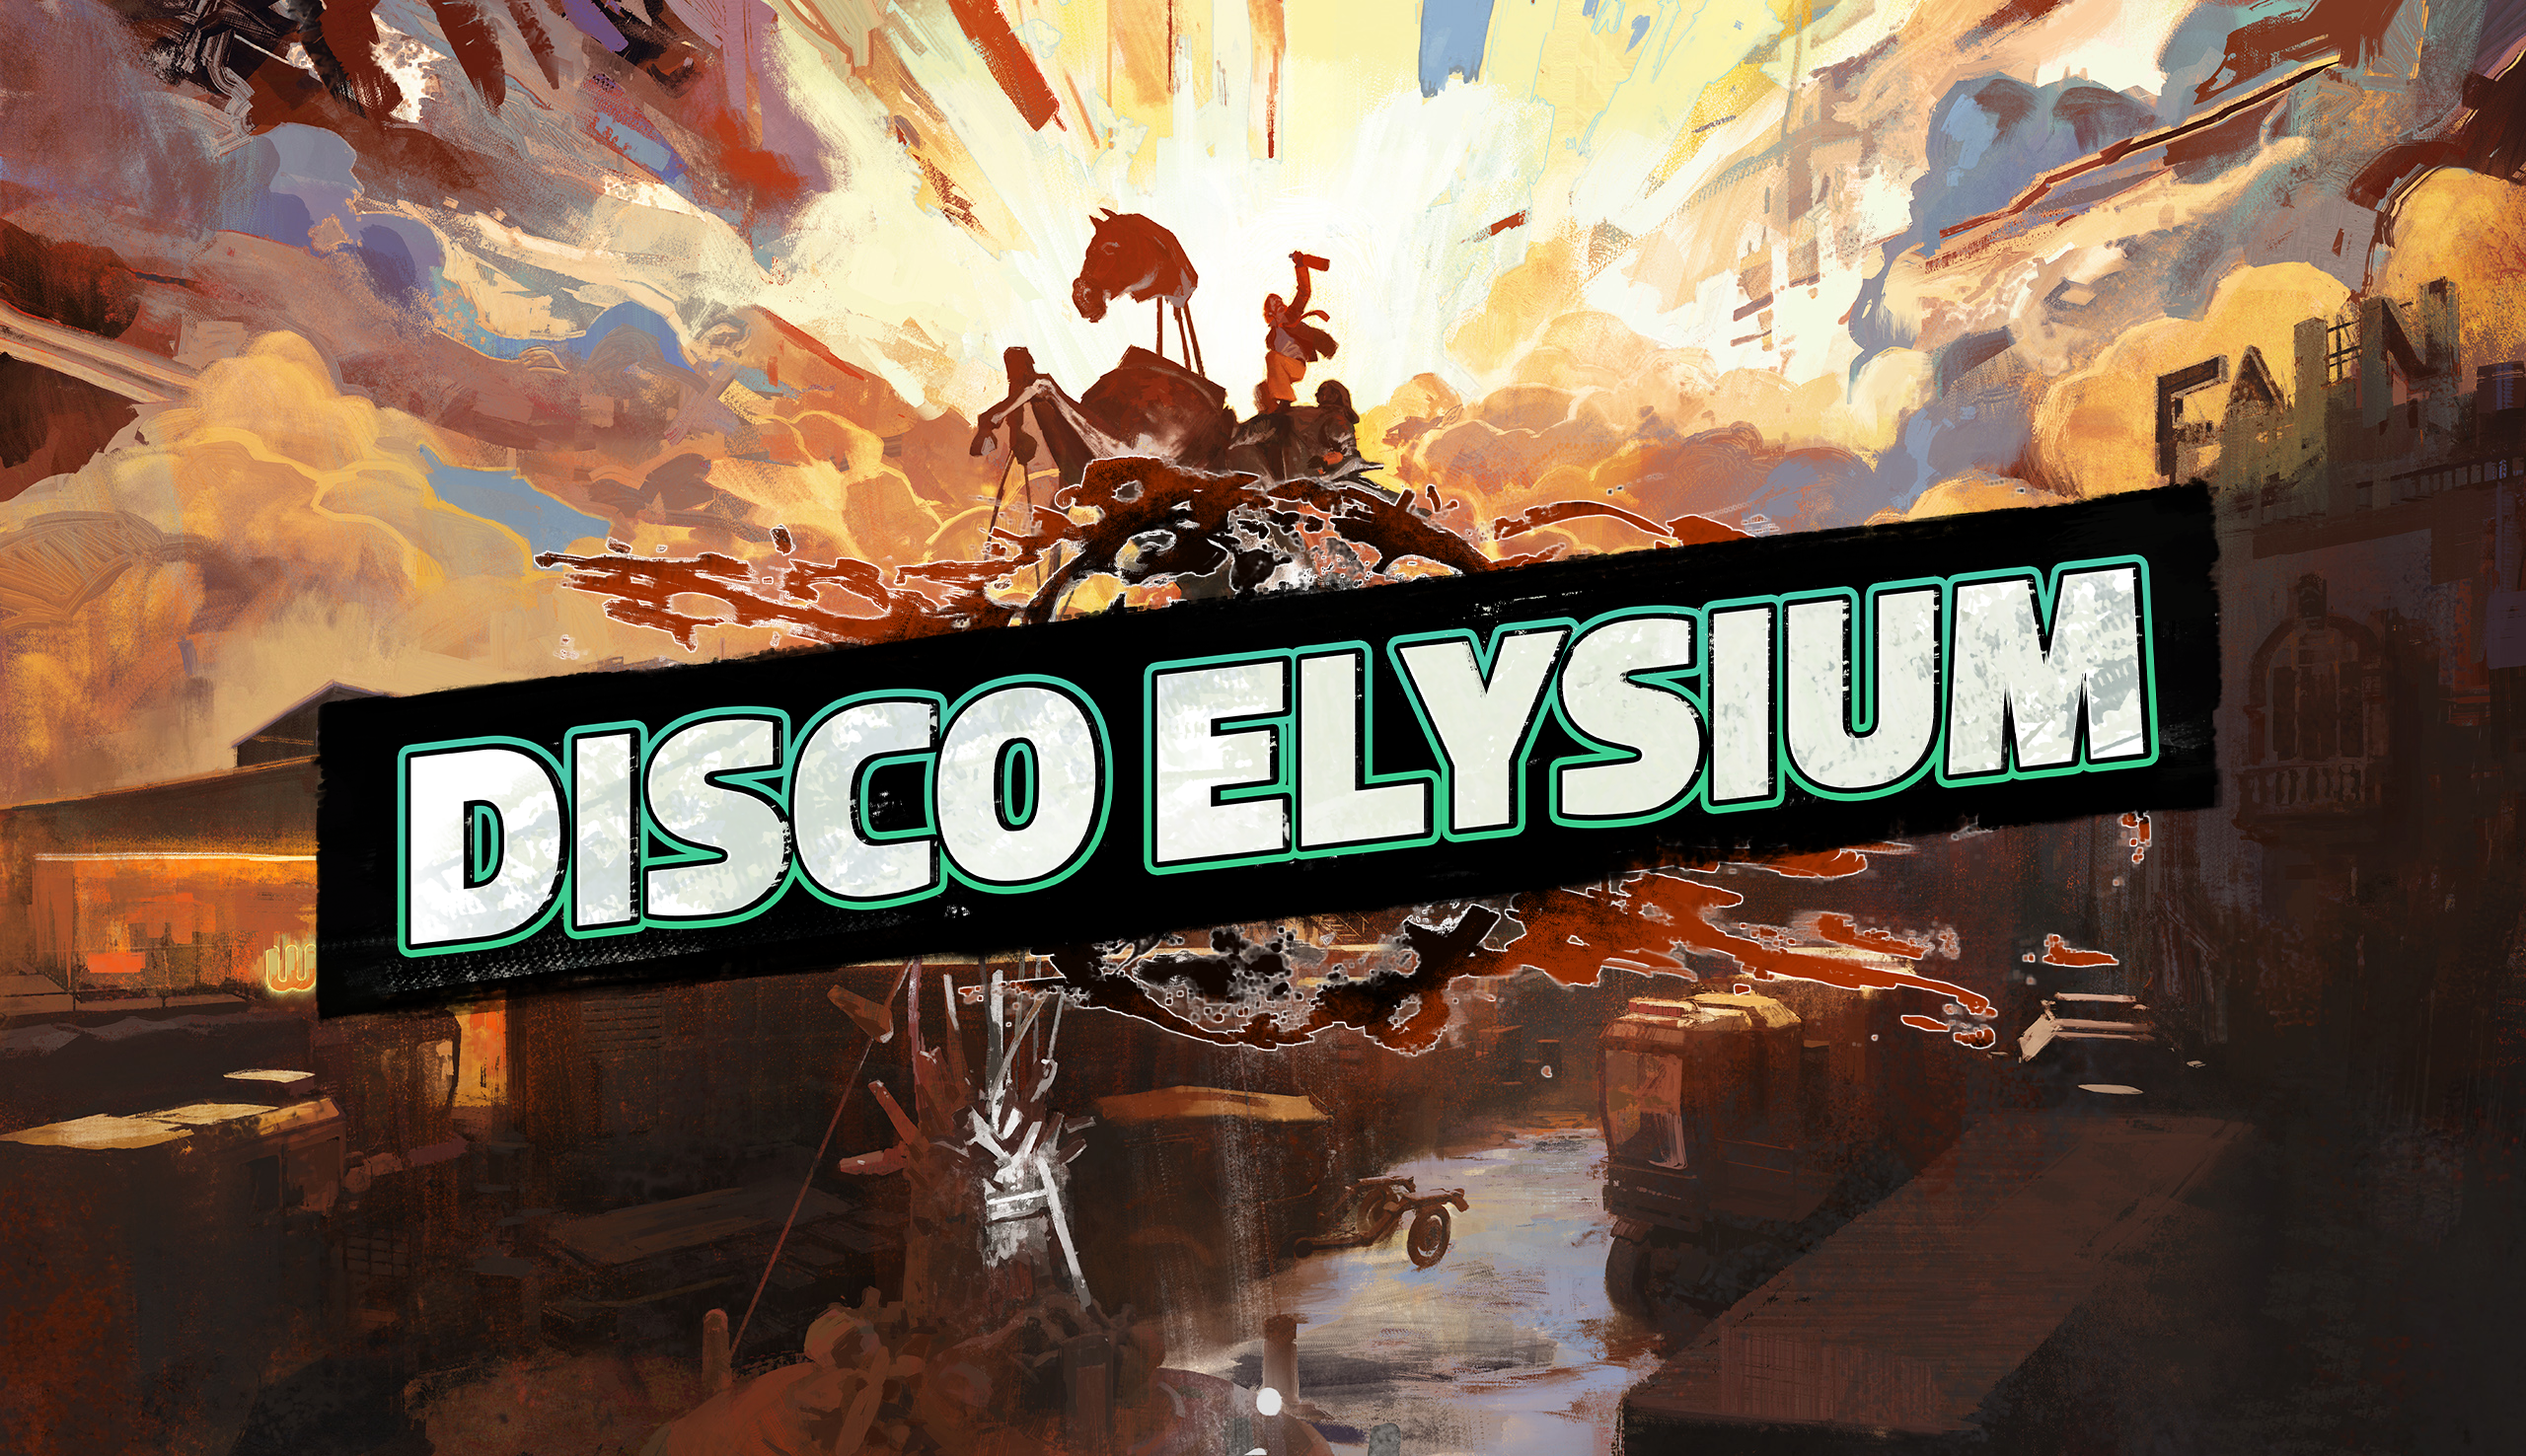 Disco Elysium review: Blame It On The Boogie